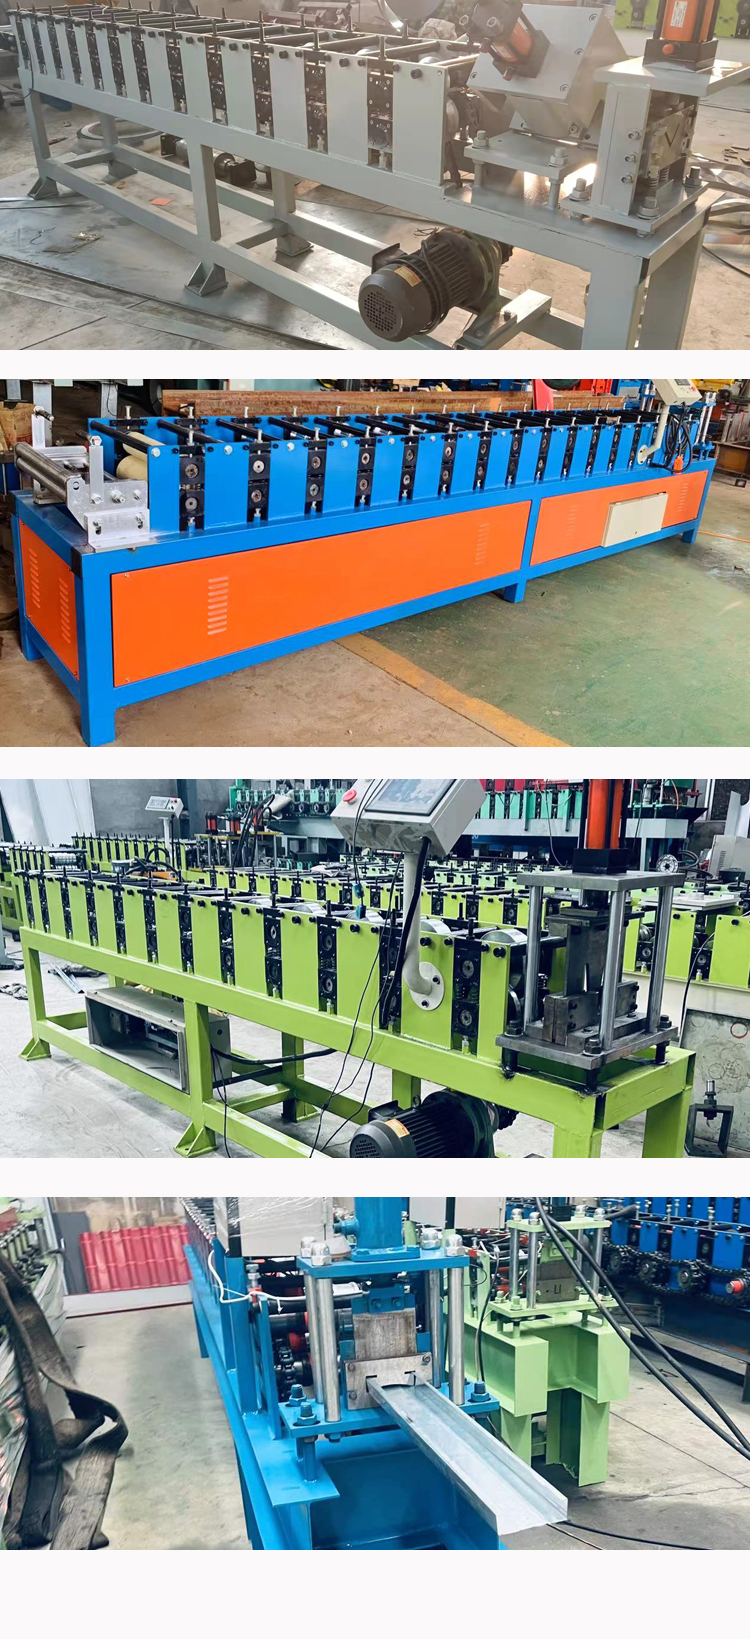 840/900 double layer tile pressing machine roof panel forming machine metal forming equipment Jinshuo